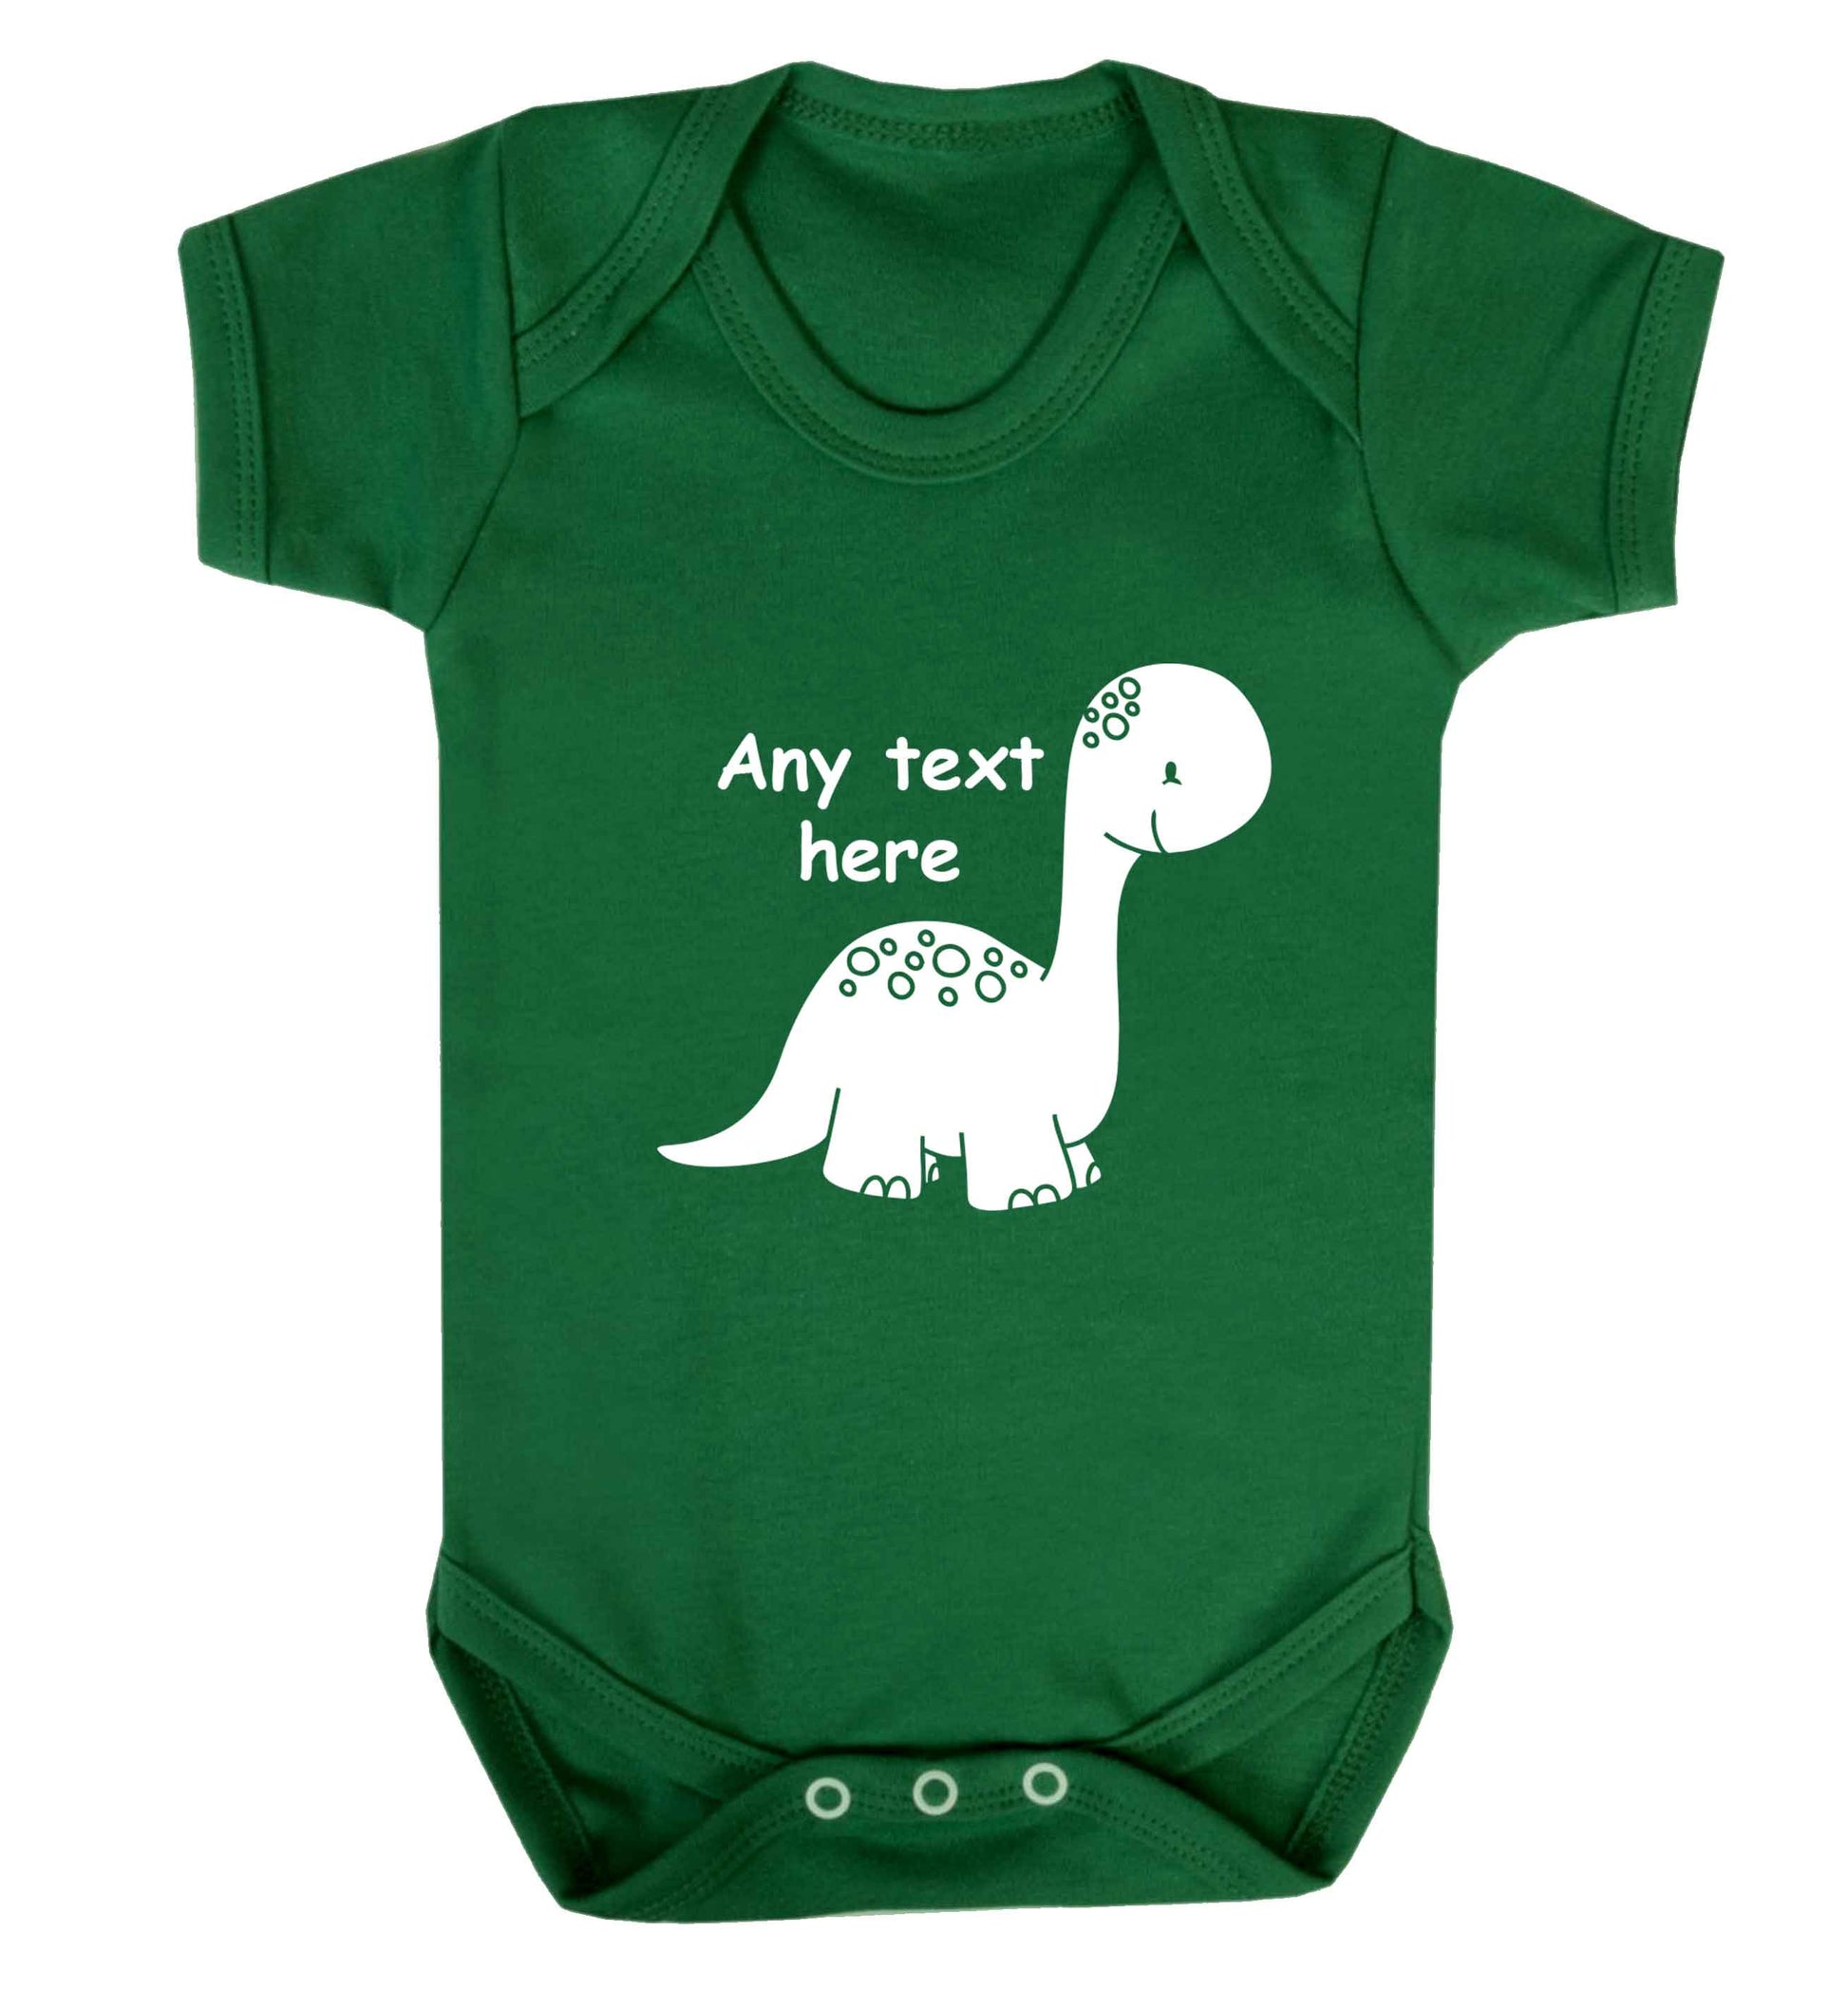 Dinosaur any text baby vest green 18-24 months